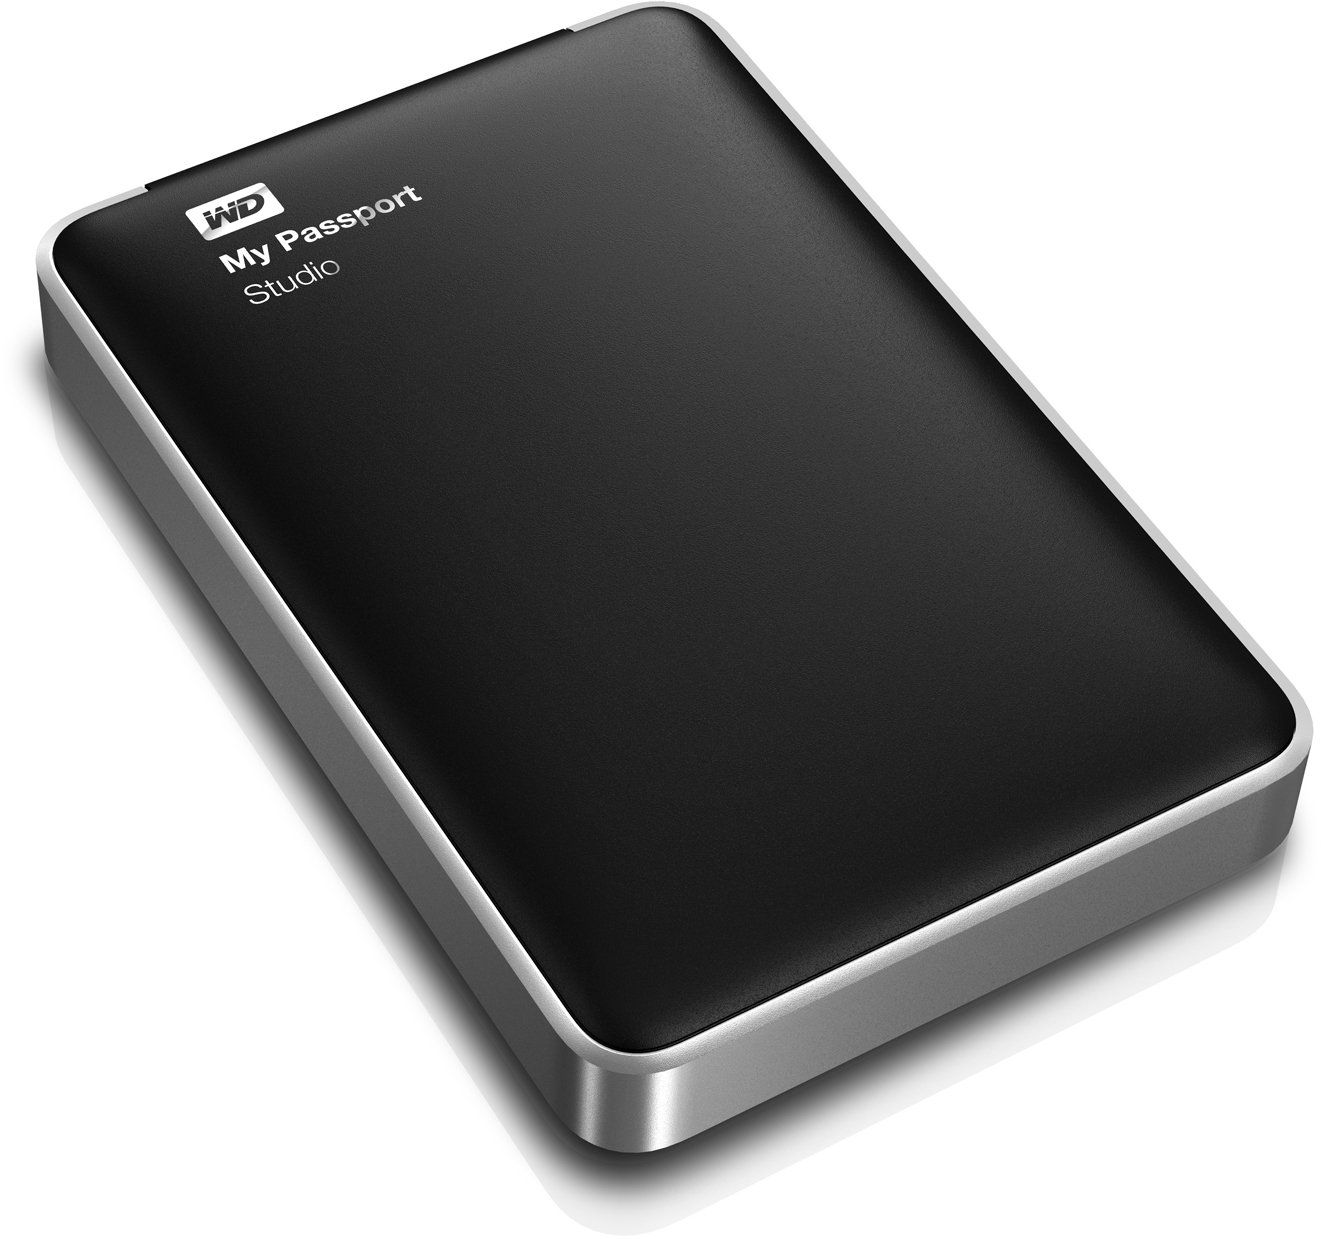 WD's My Passport Studio external hard drive now reaches up to 2TB of capacity